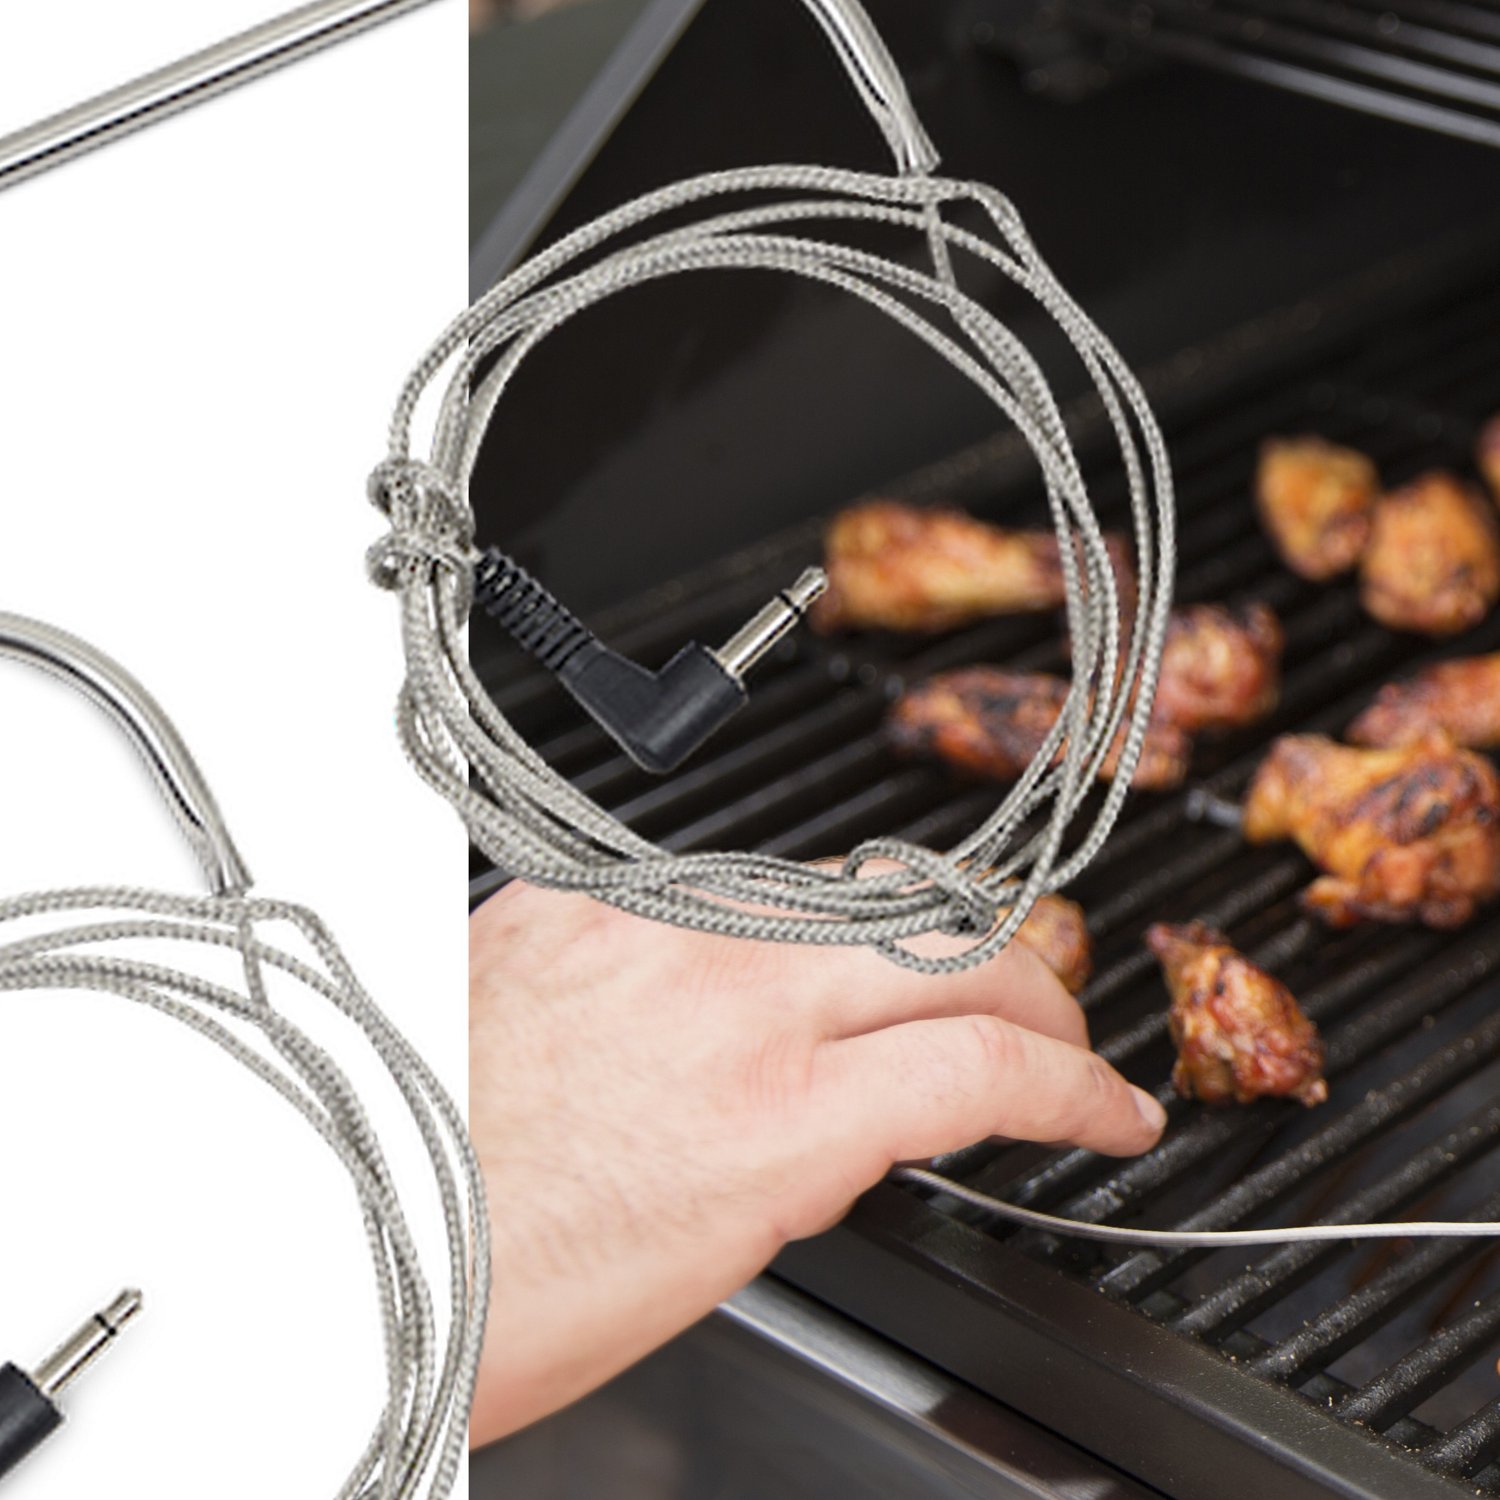 Meat Probe Compatible with All Traeger and Pit Boss BBQ Grills - 2 Pack.